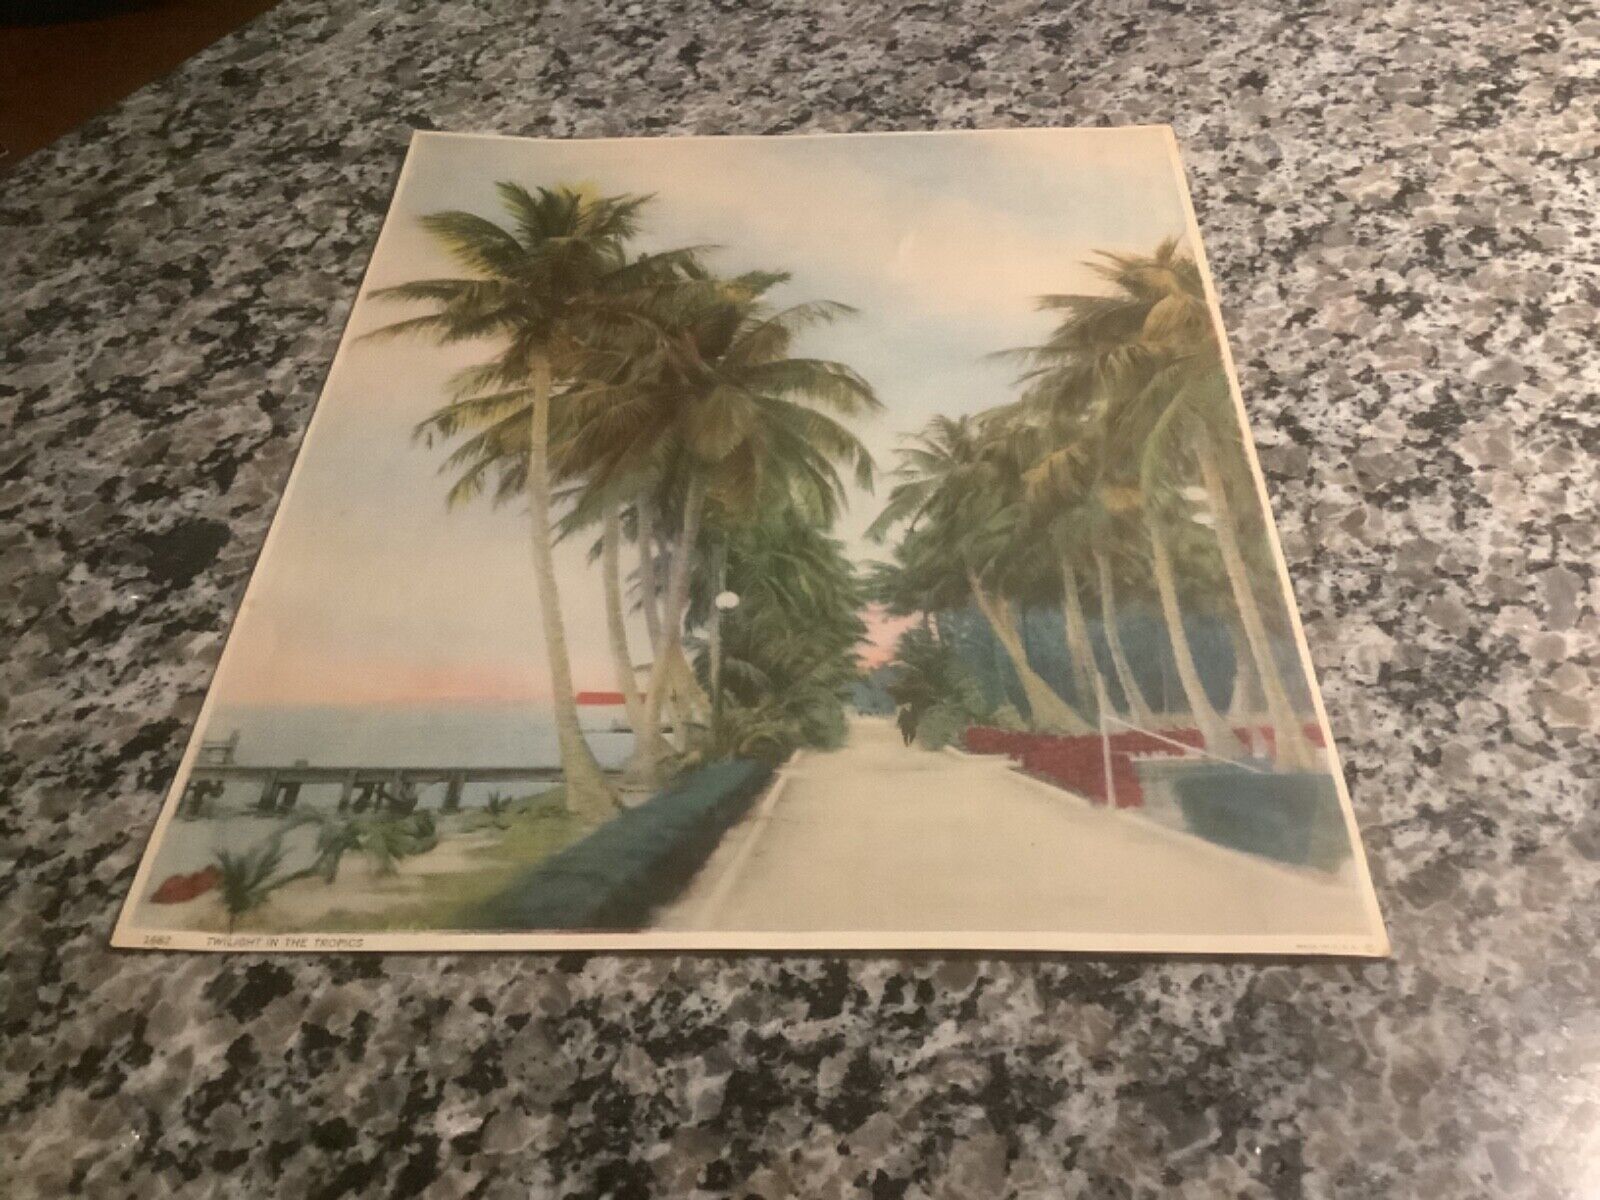 GORGEOUS 1920s Florida lithograph…TWILIGHT IN THE TROPICS…wonderful palm trees